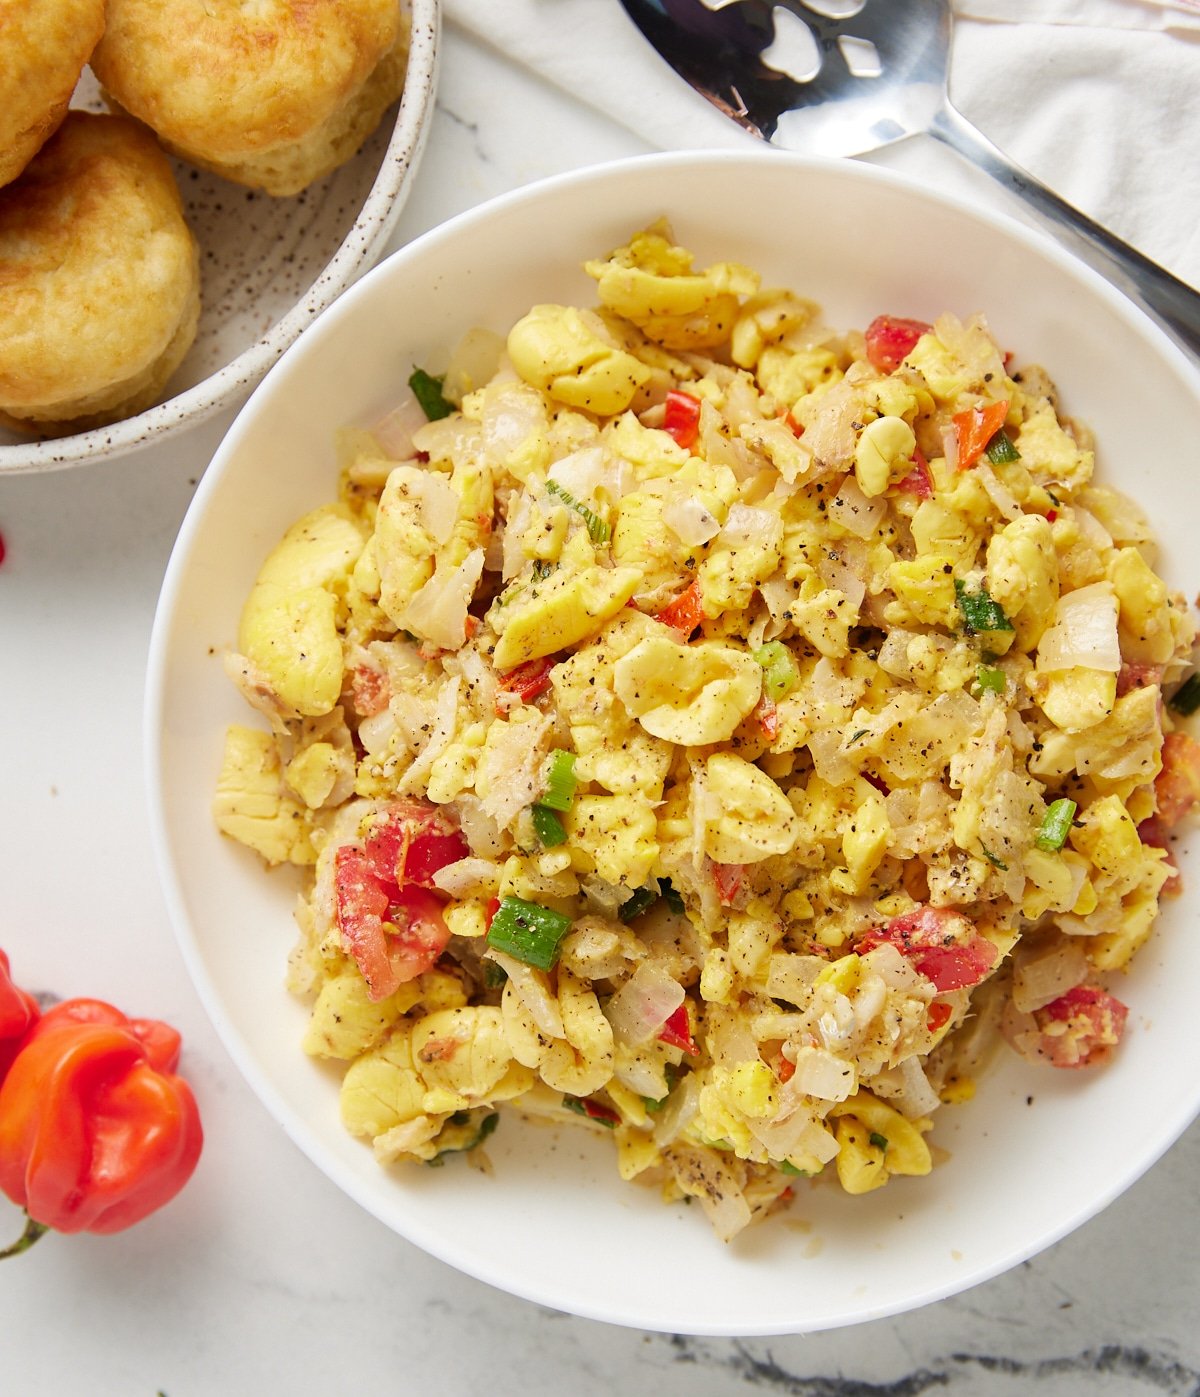 Ackee and Saltfish - My Forking Life